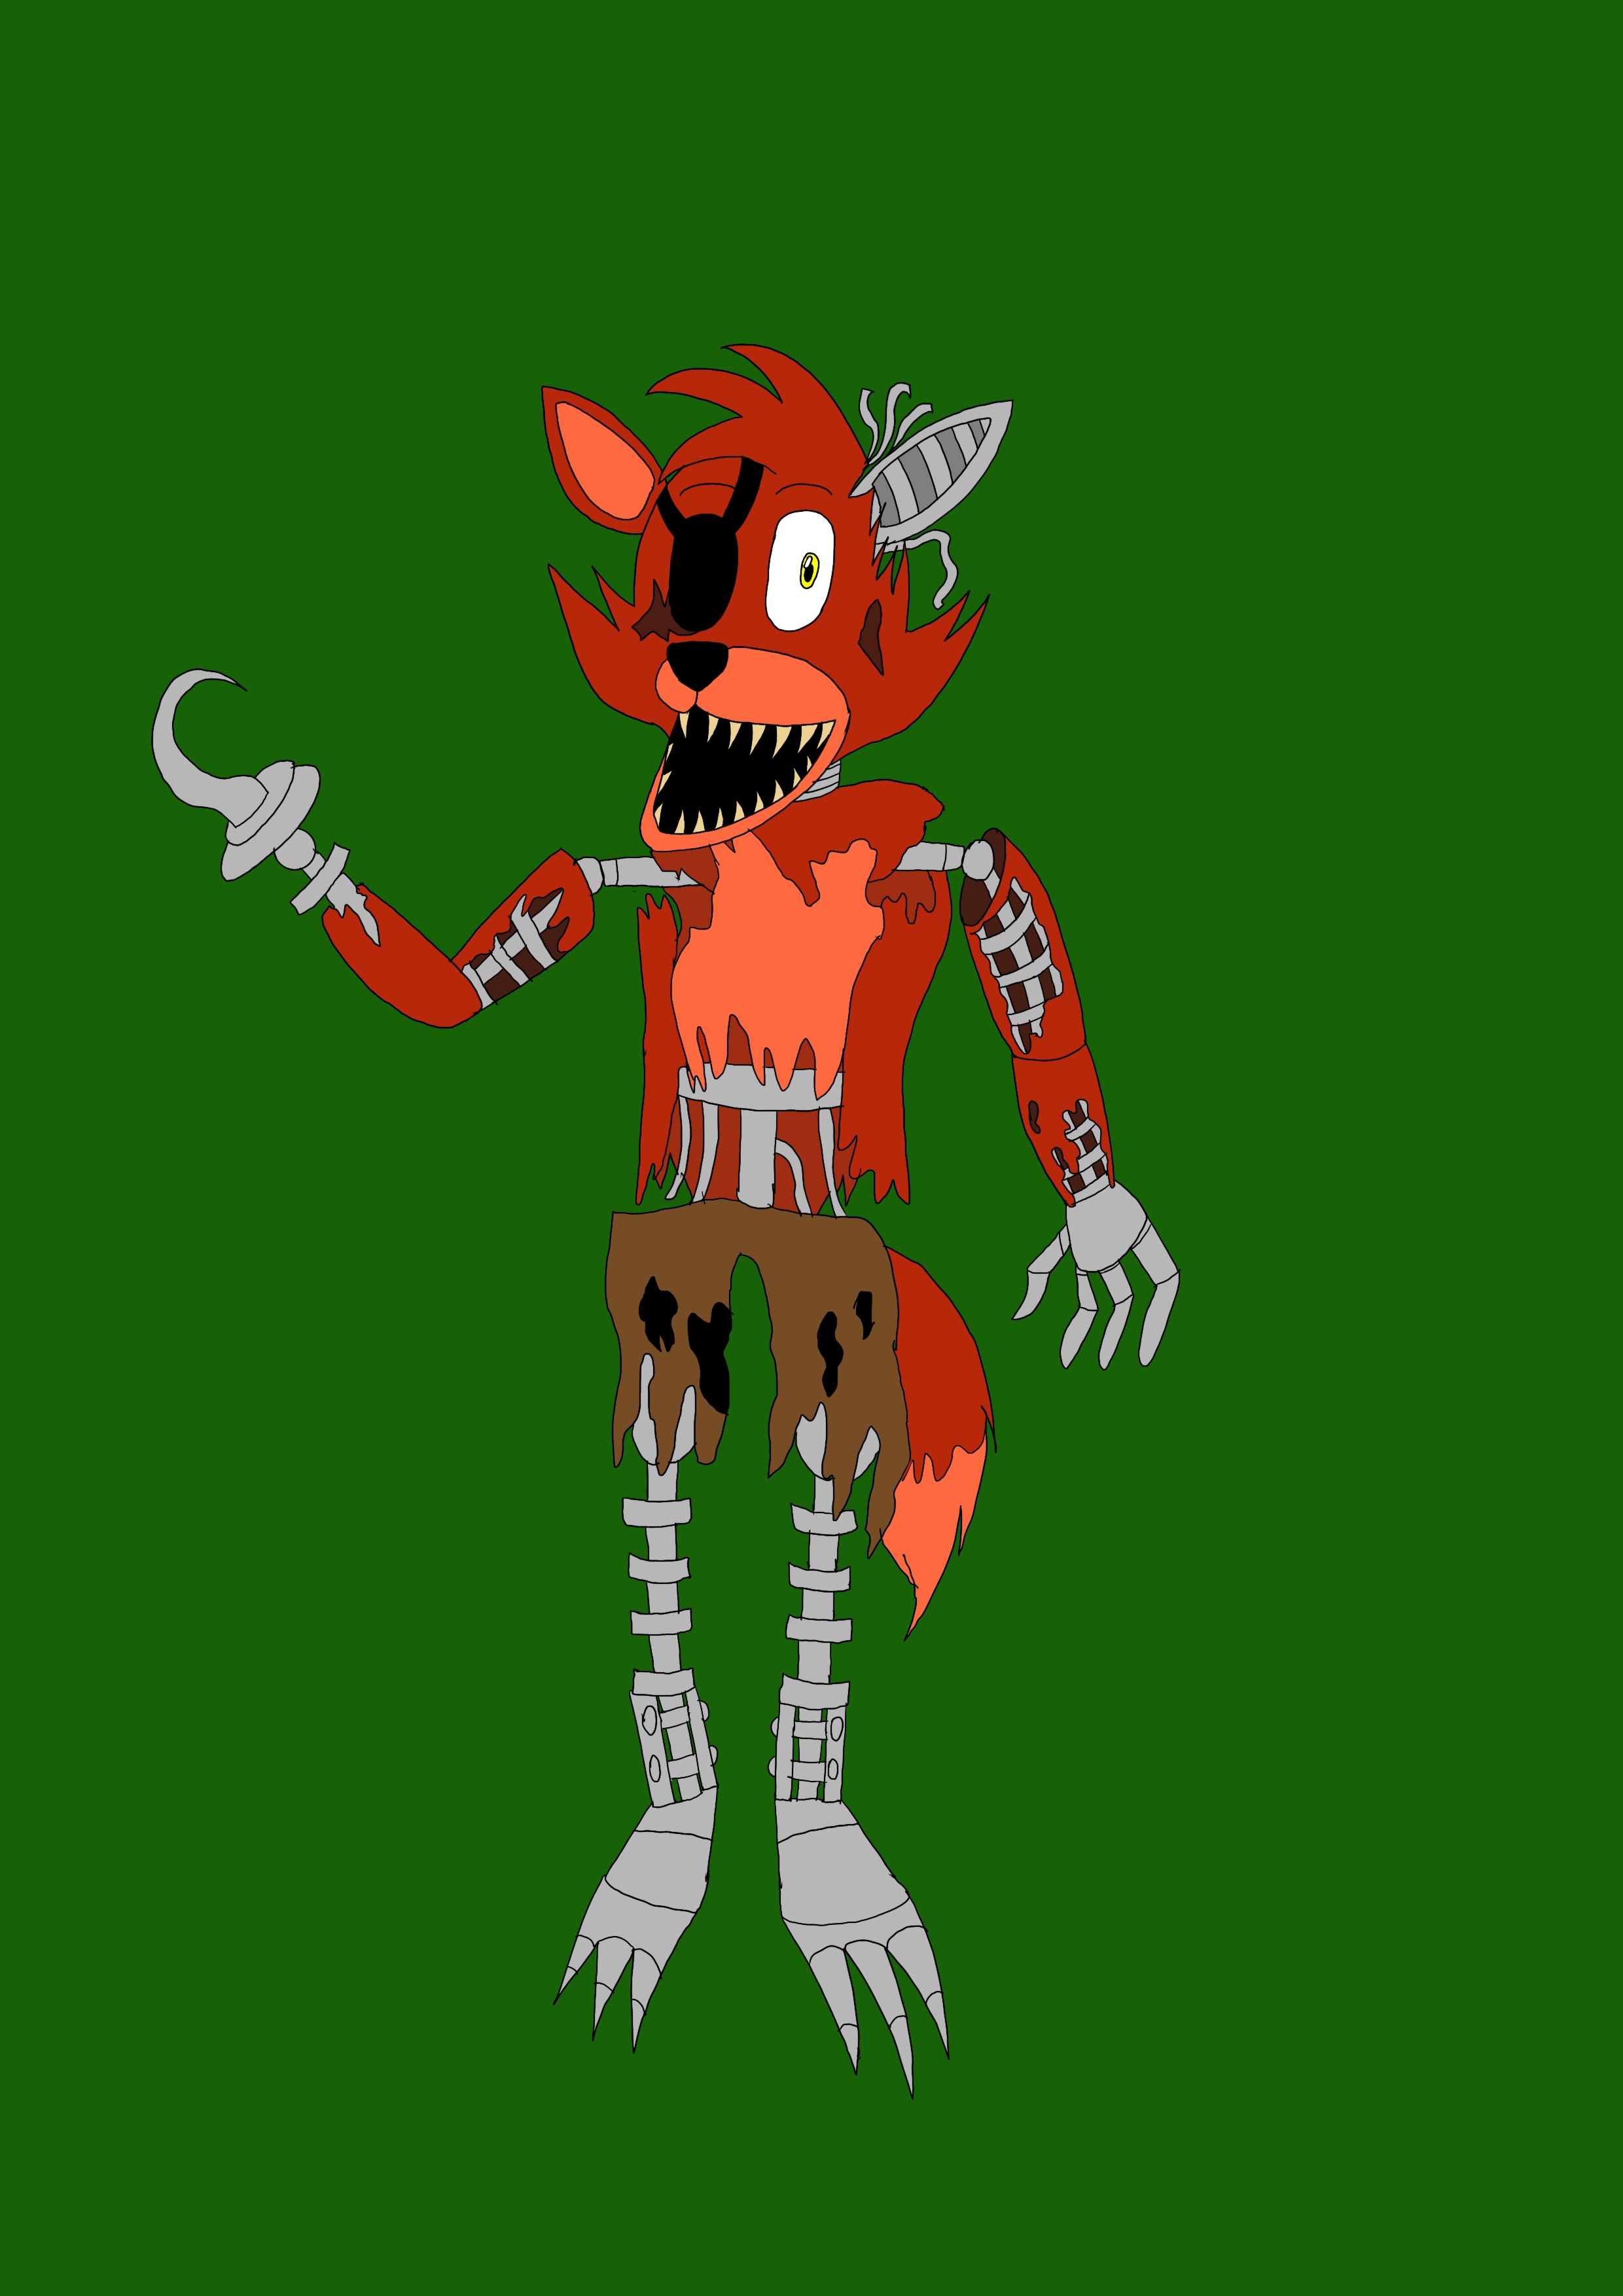 Unofficial Foxy Reference Guide by Centchi on DeviantArt